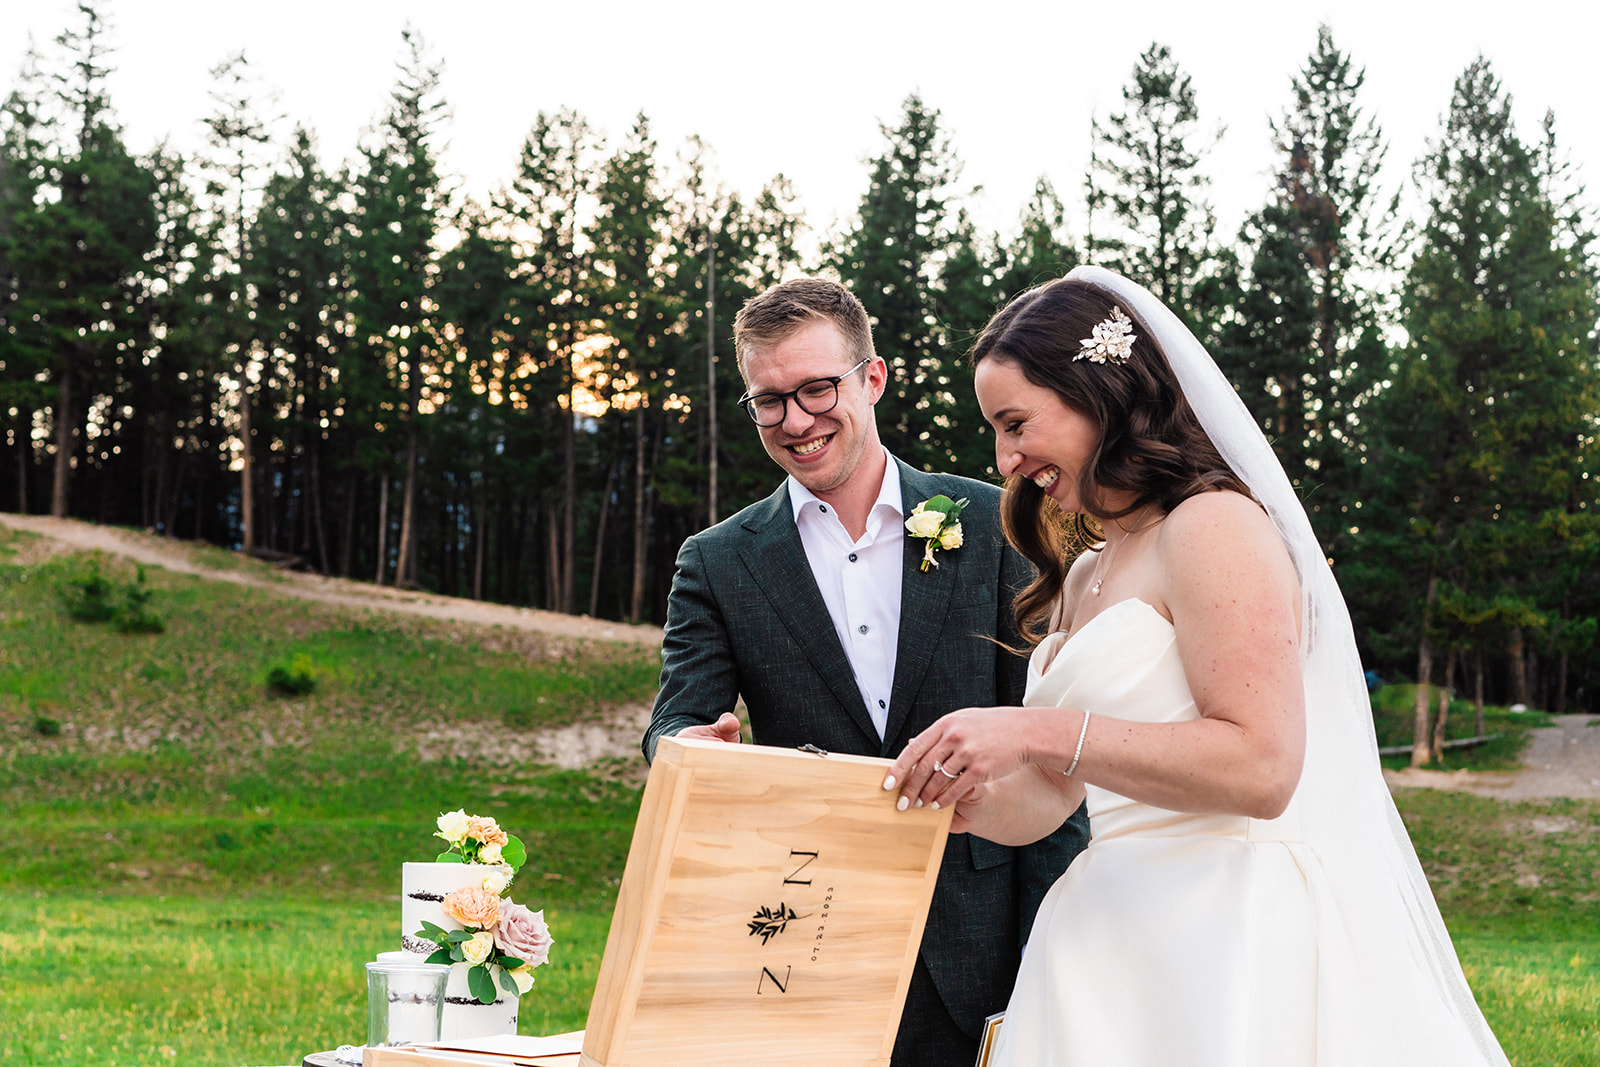 Bride and groom looking at wooden time capsule